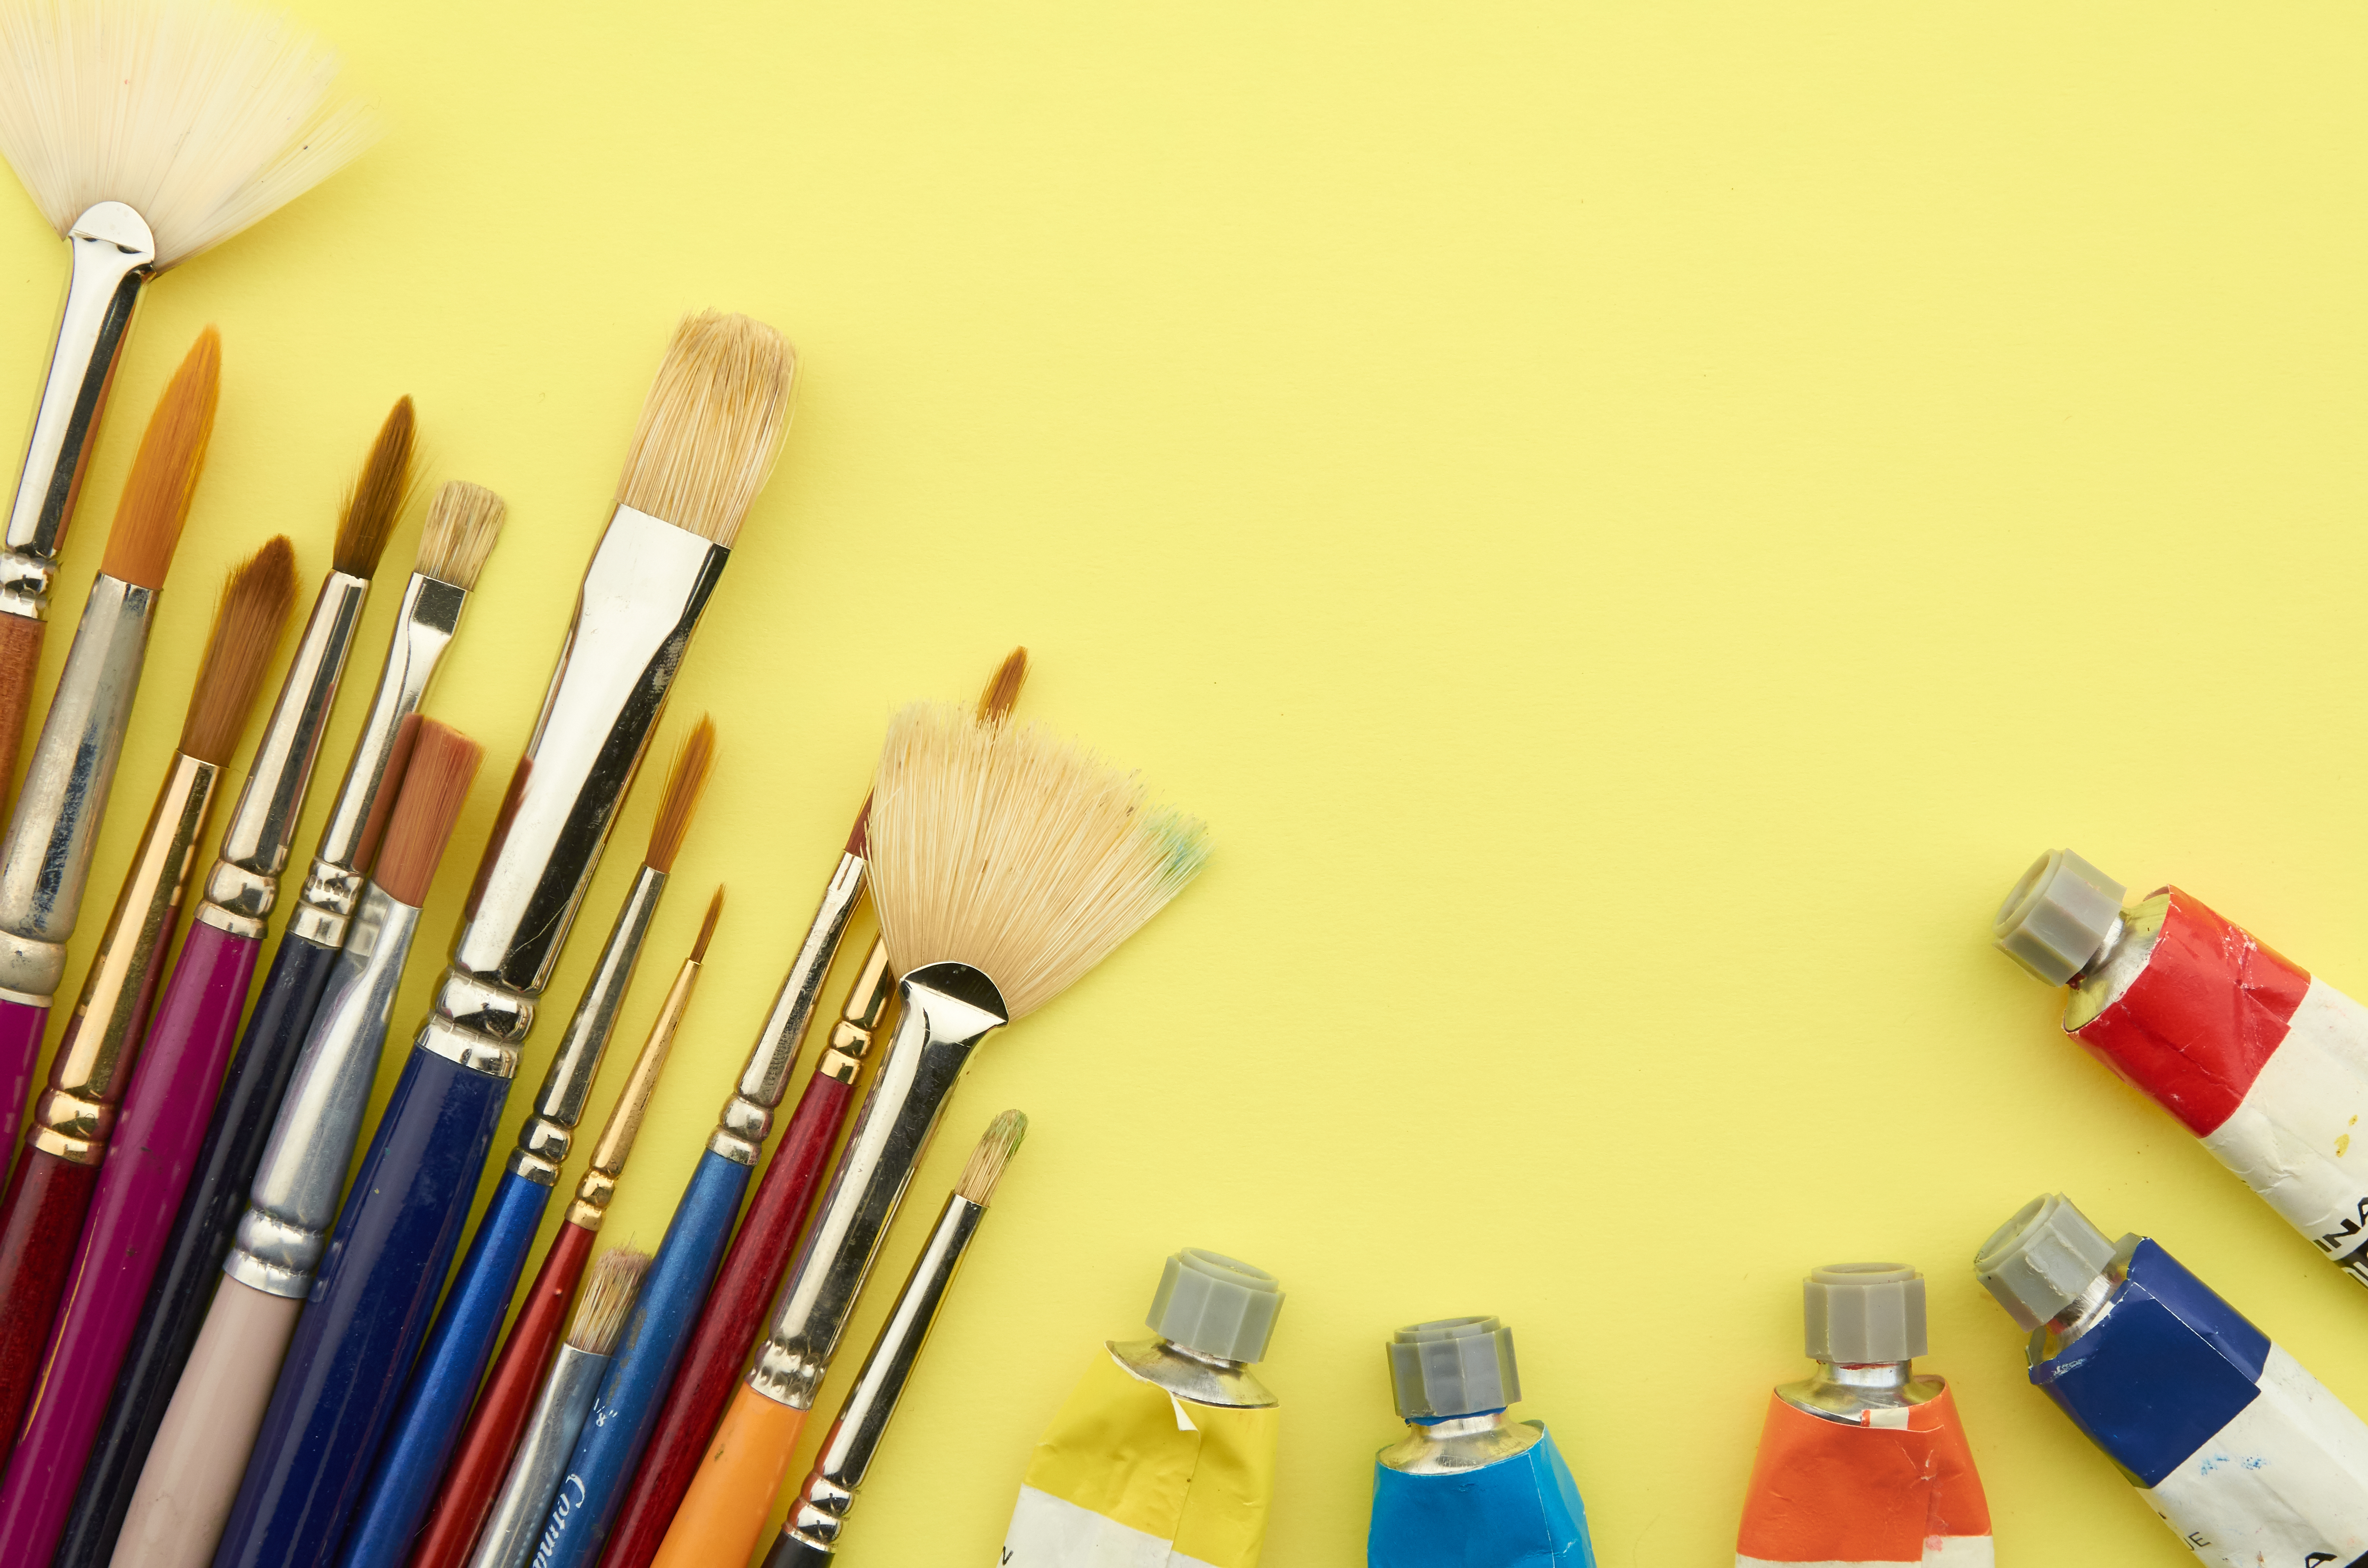 Free painting supplies